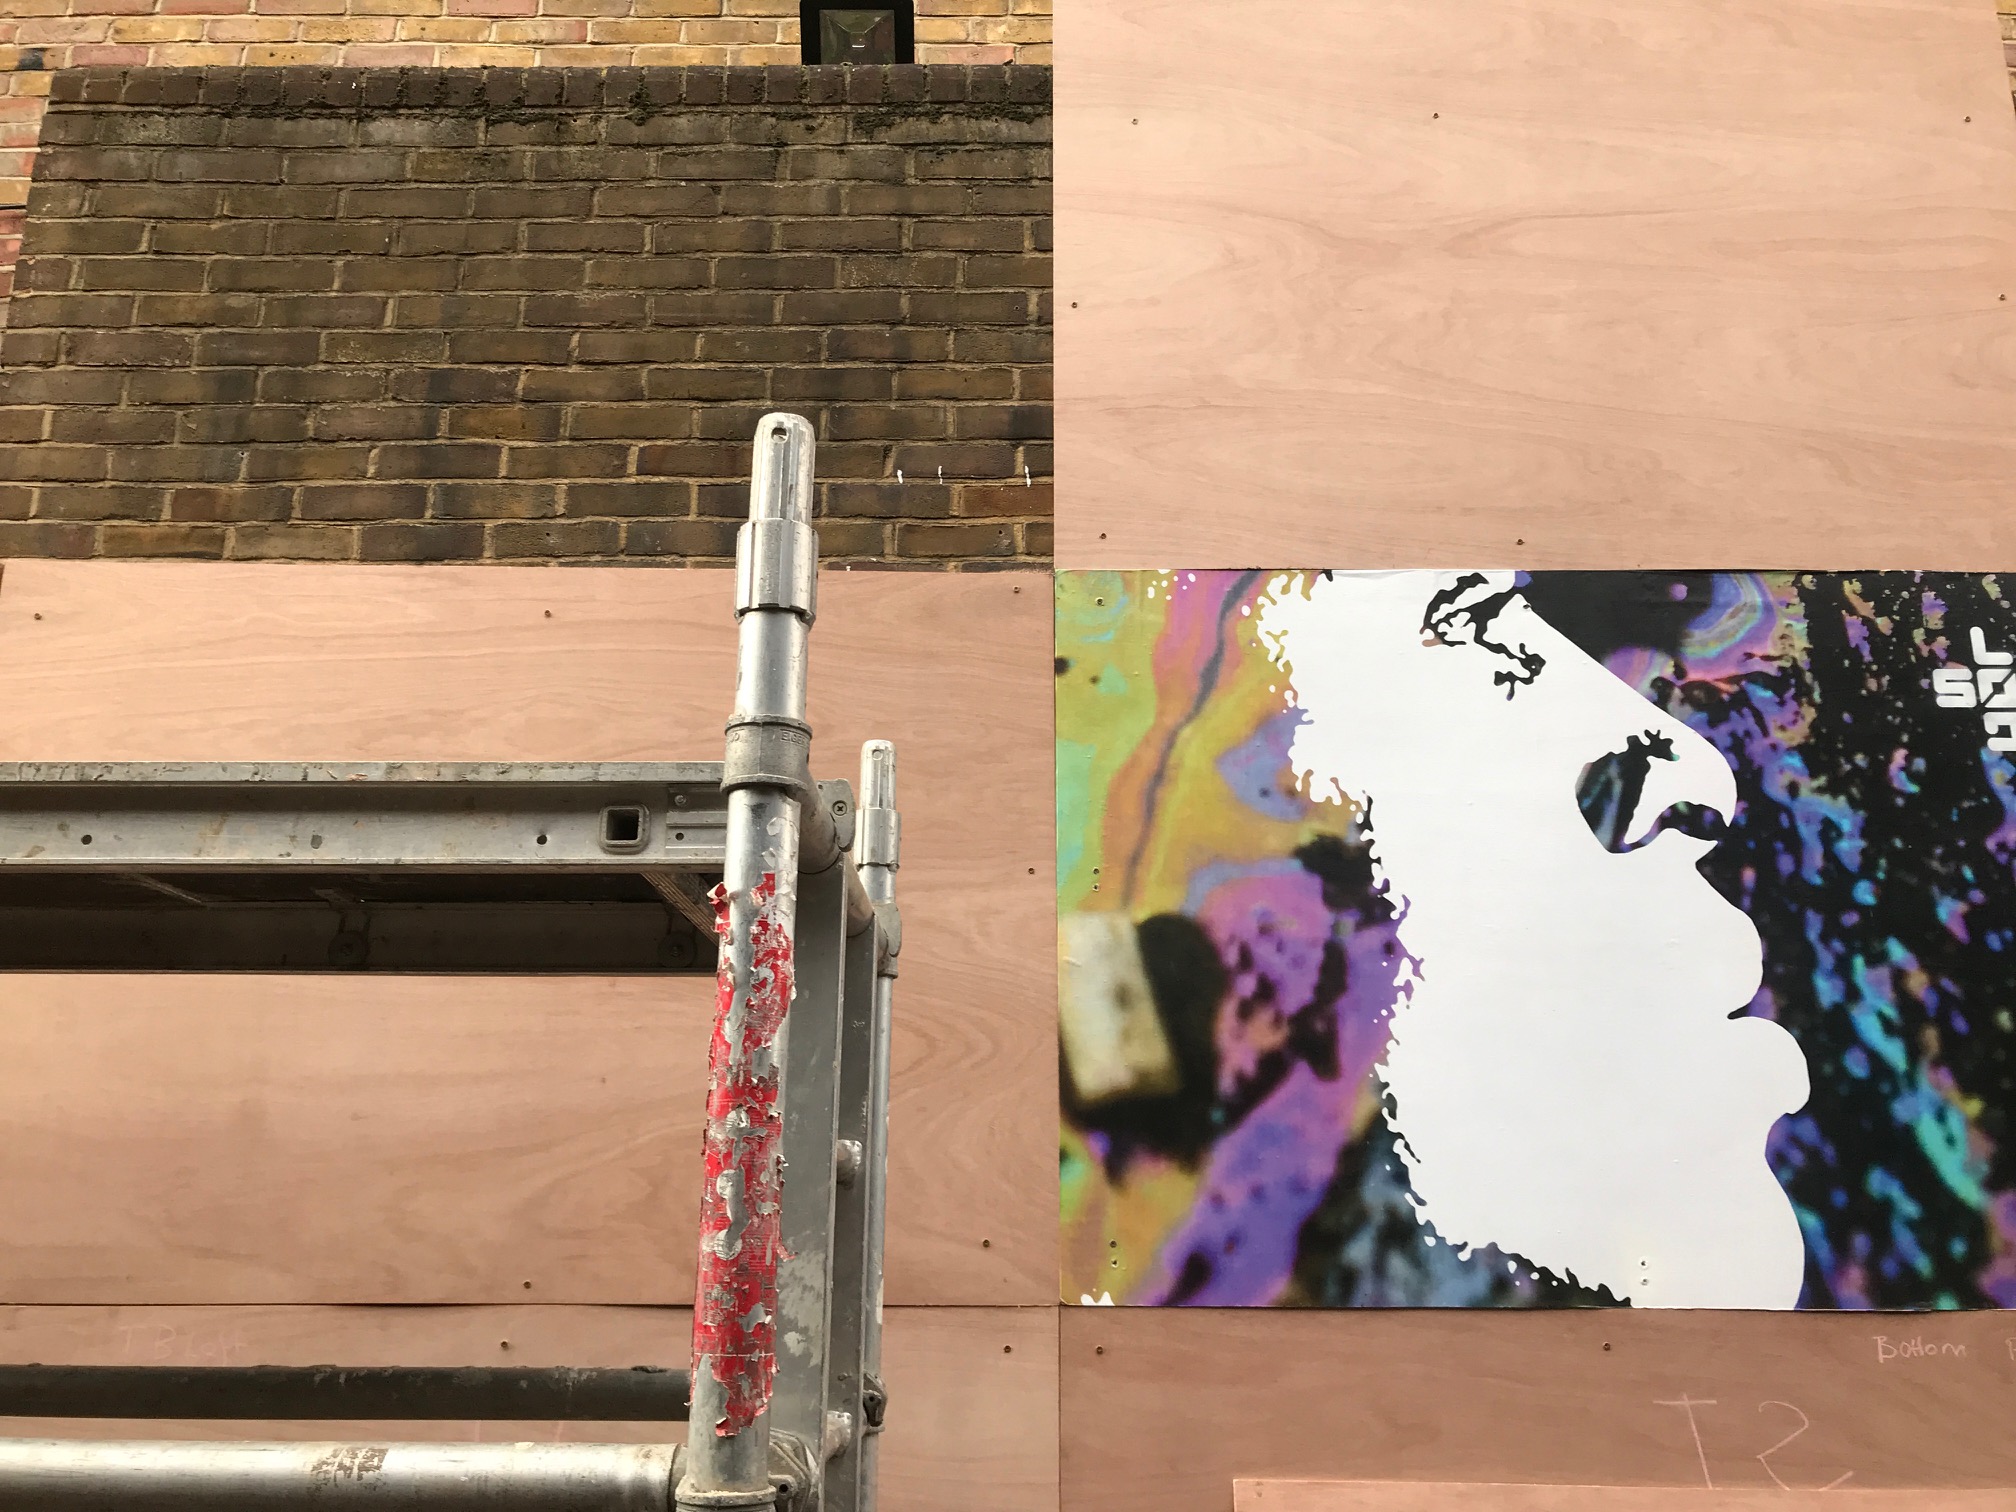 Three SoulD Art pieces, spanning over 12-foot square was revealed to replace the smaller jigsaw pieces dotted around Peckham, from the Bigger Picture art trail.